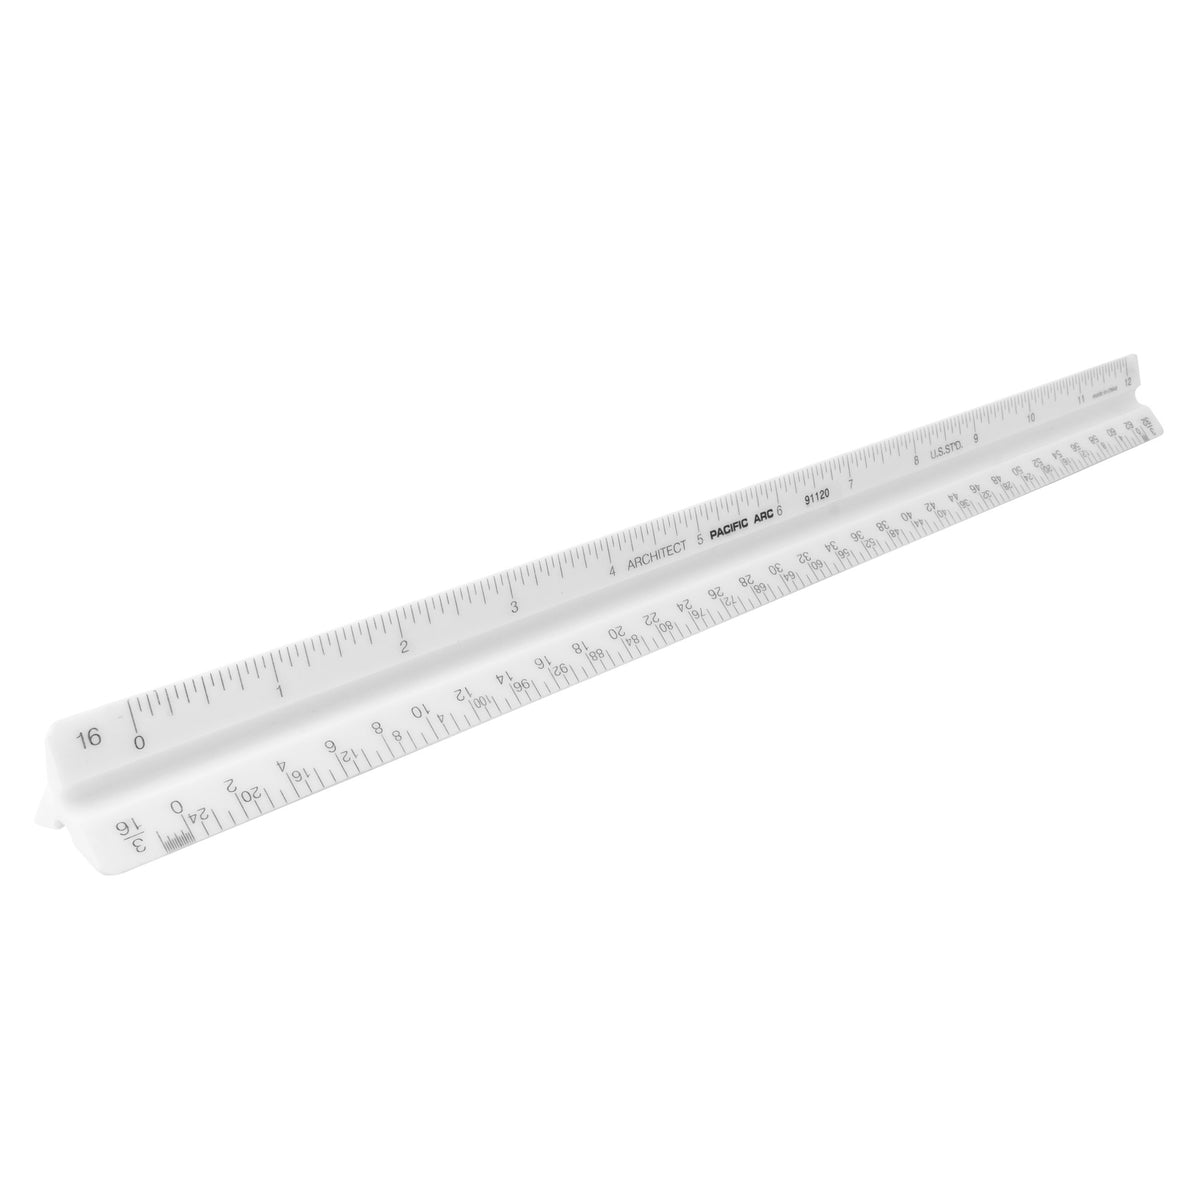 Pacific Arc | Economy Triangular Scale Ruler | Architect, Engineer, Mechanical Engineer & Metric Scales.